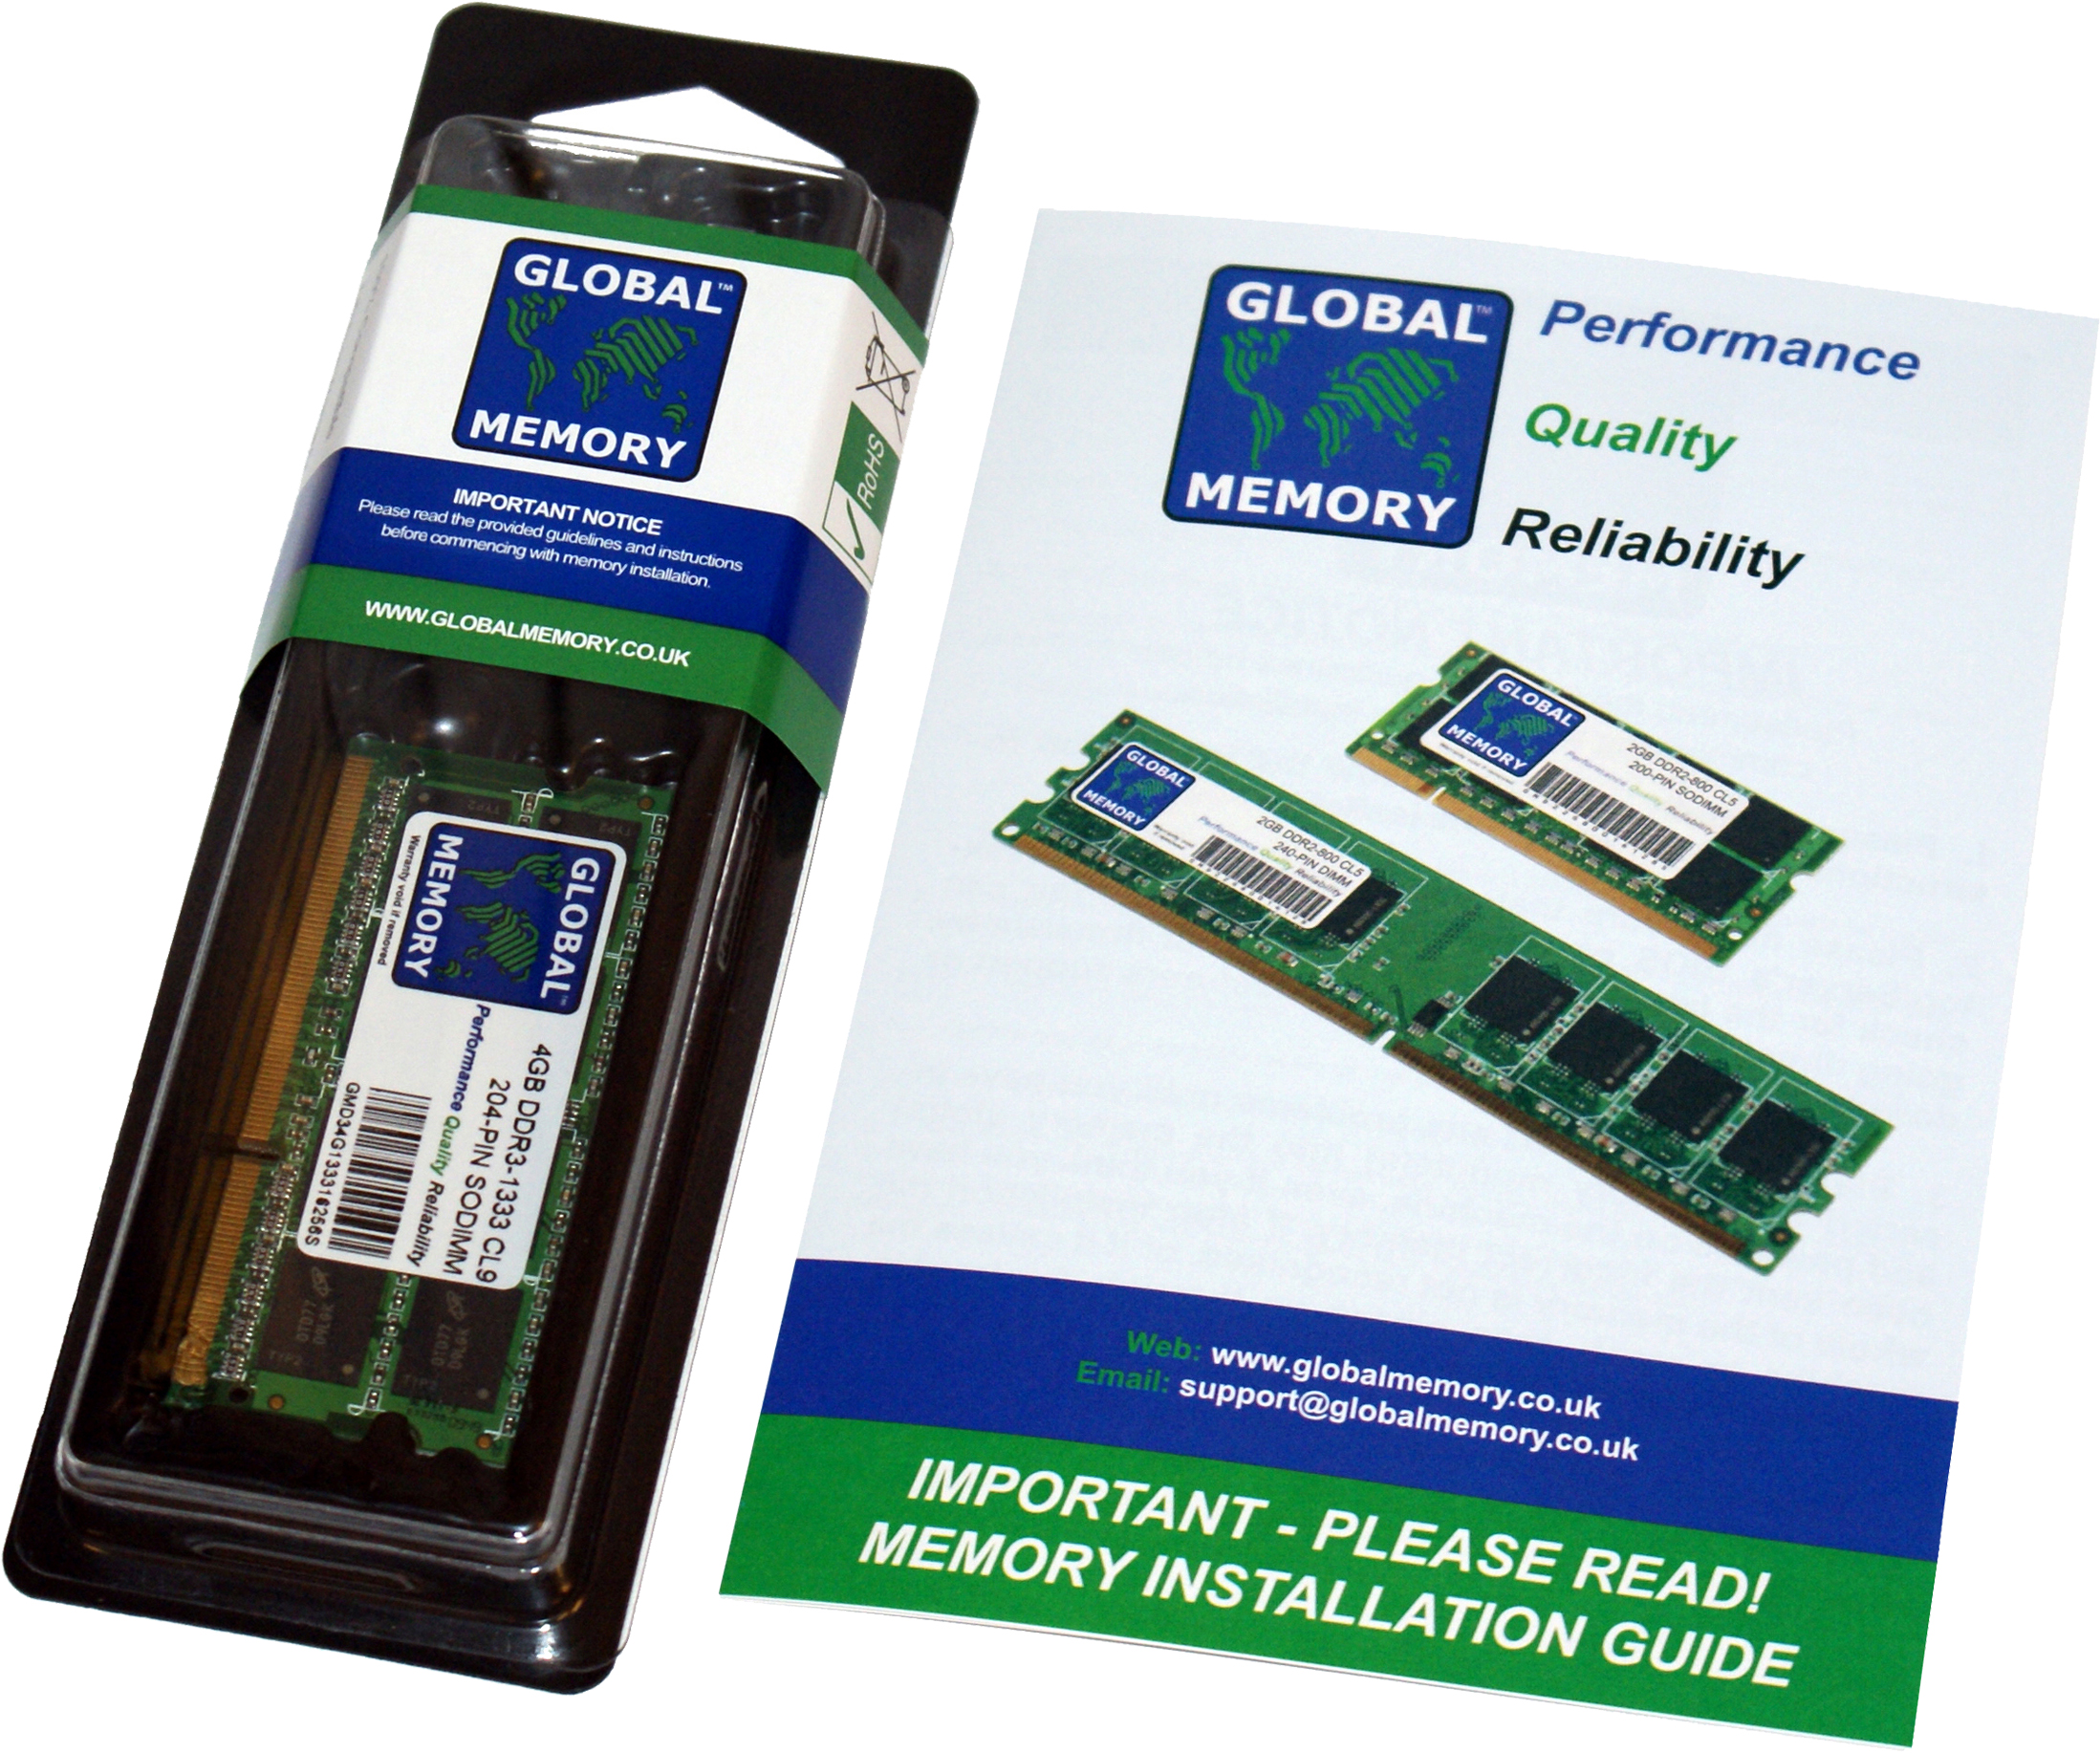 8GB DDR3 1866MHz PC3-14900 204-PIN SODIMM MEMORY RAM FOR PACKARD BELL LAPTOPS/NOTEBOOKS